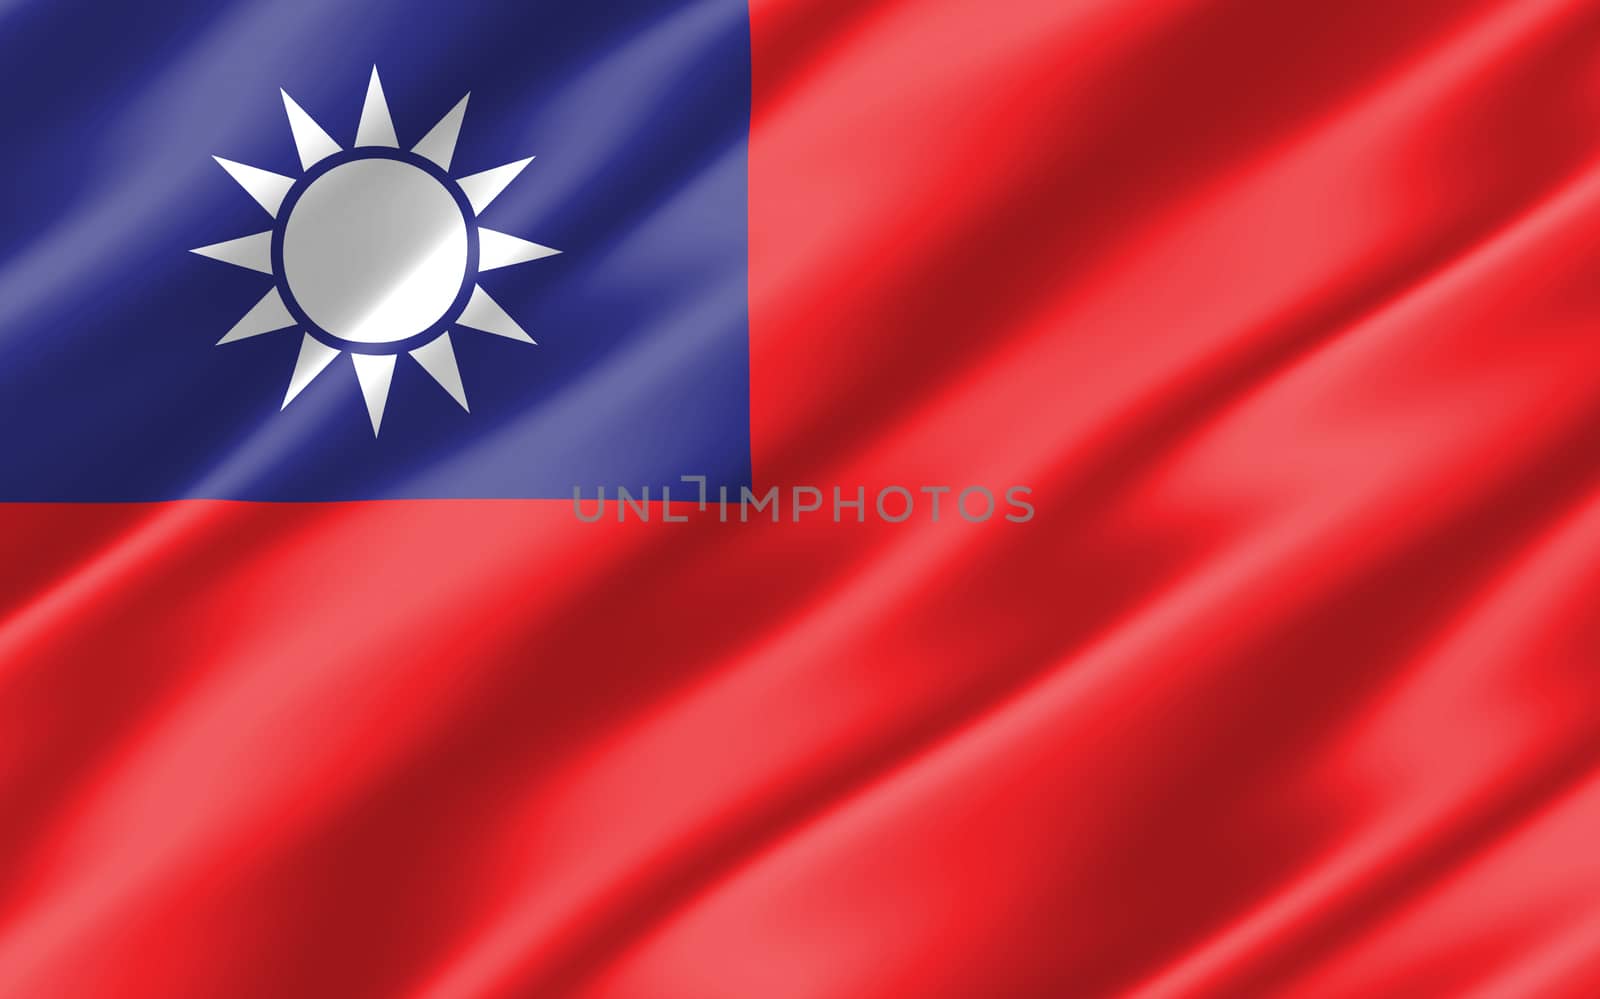 Silk wavy flag of Taiwan graphic. Wavy Taiwanese flag 3D illustration. Rippled Taiwan country flag is a symbol of freedom, patriotism and independence.